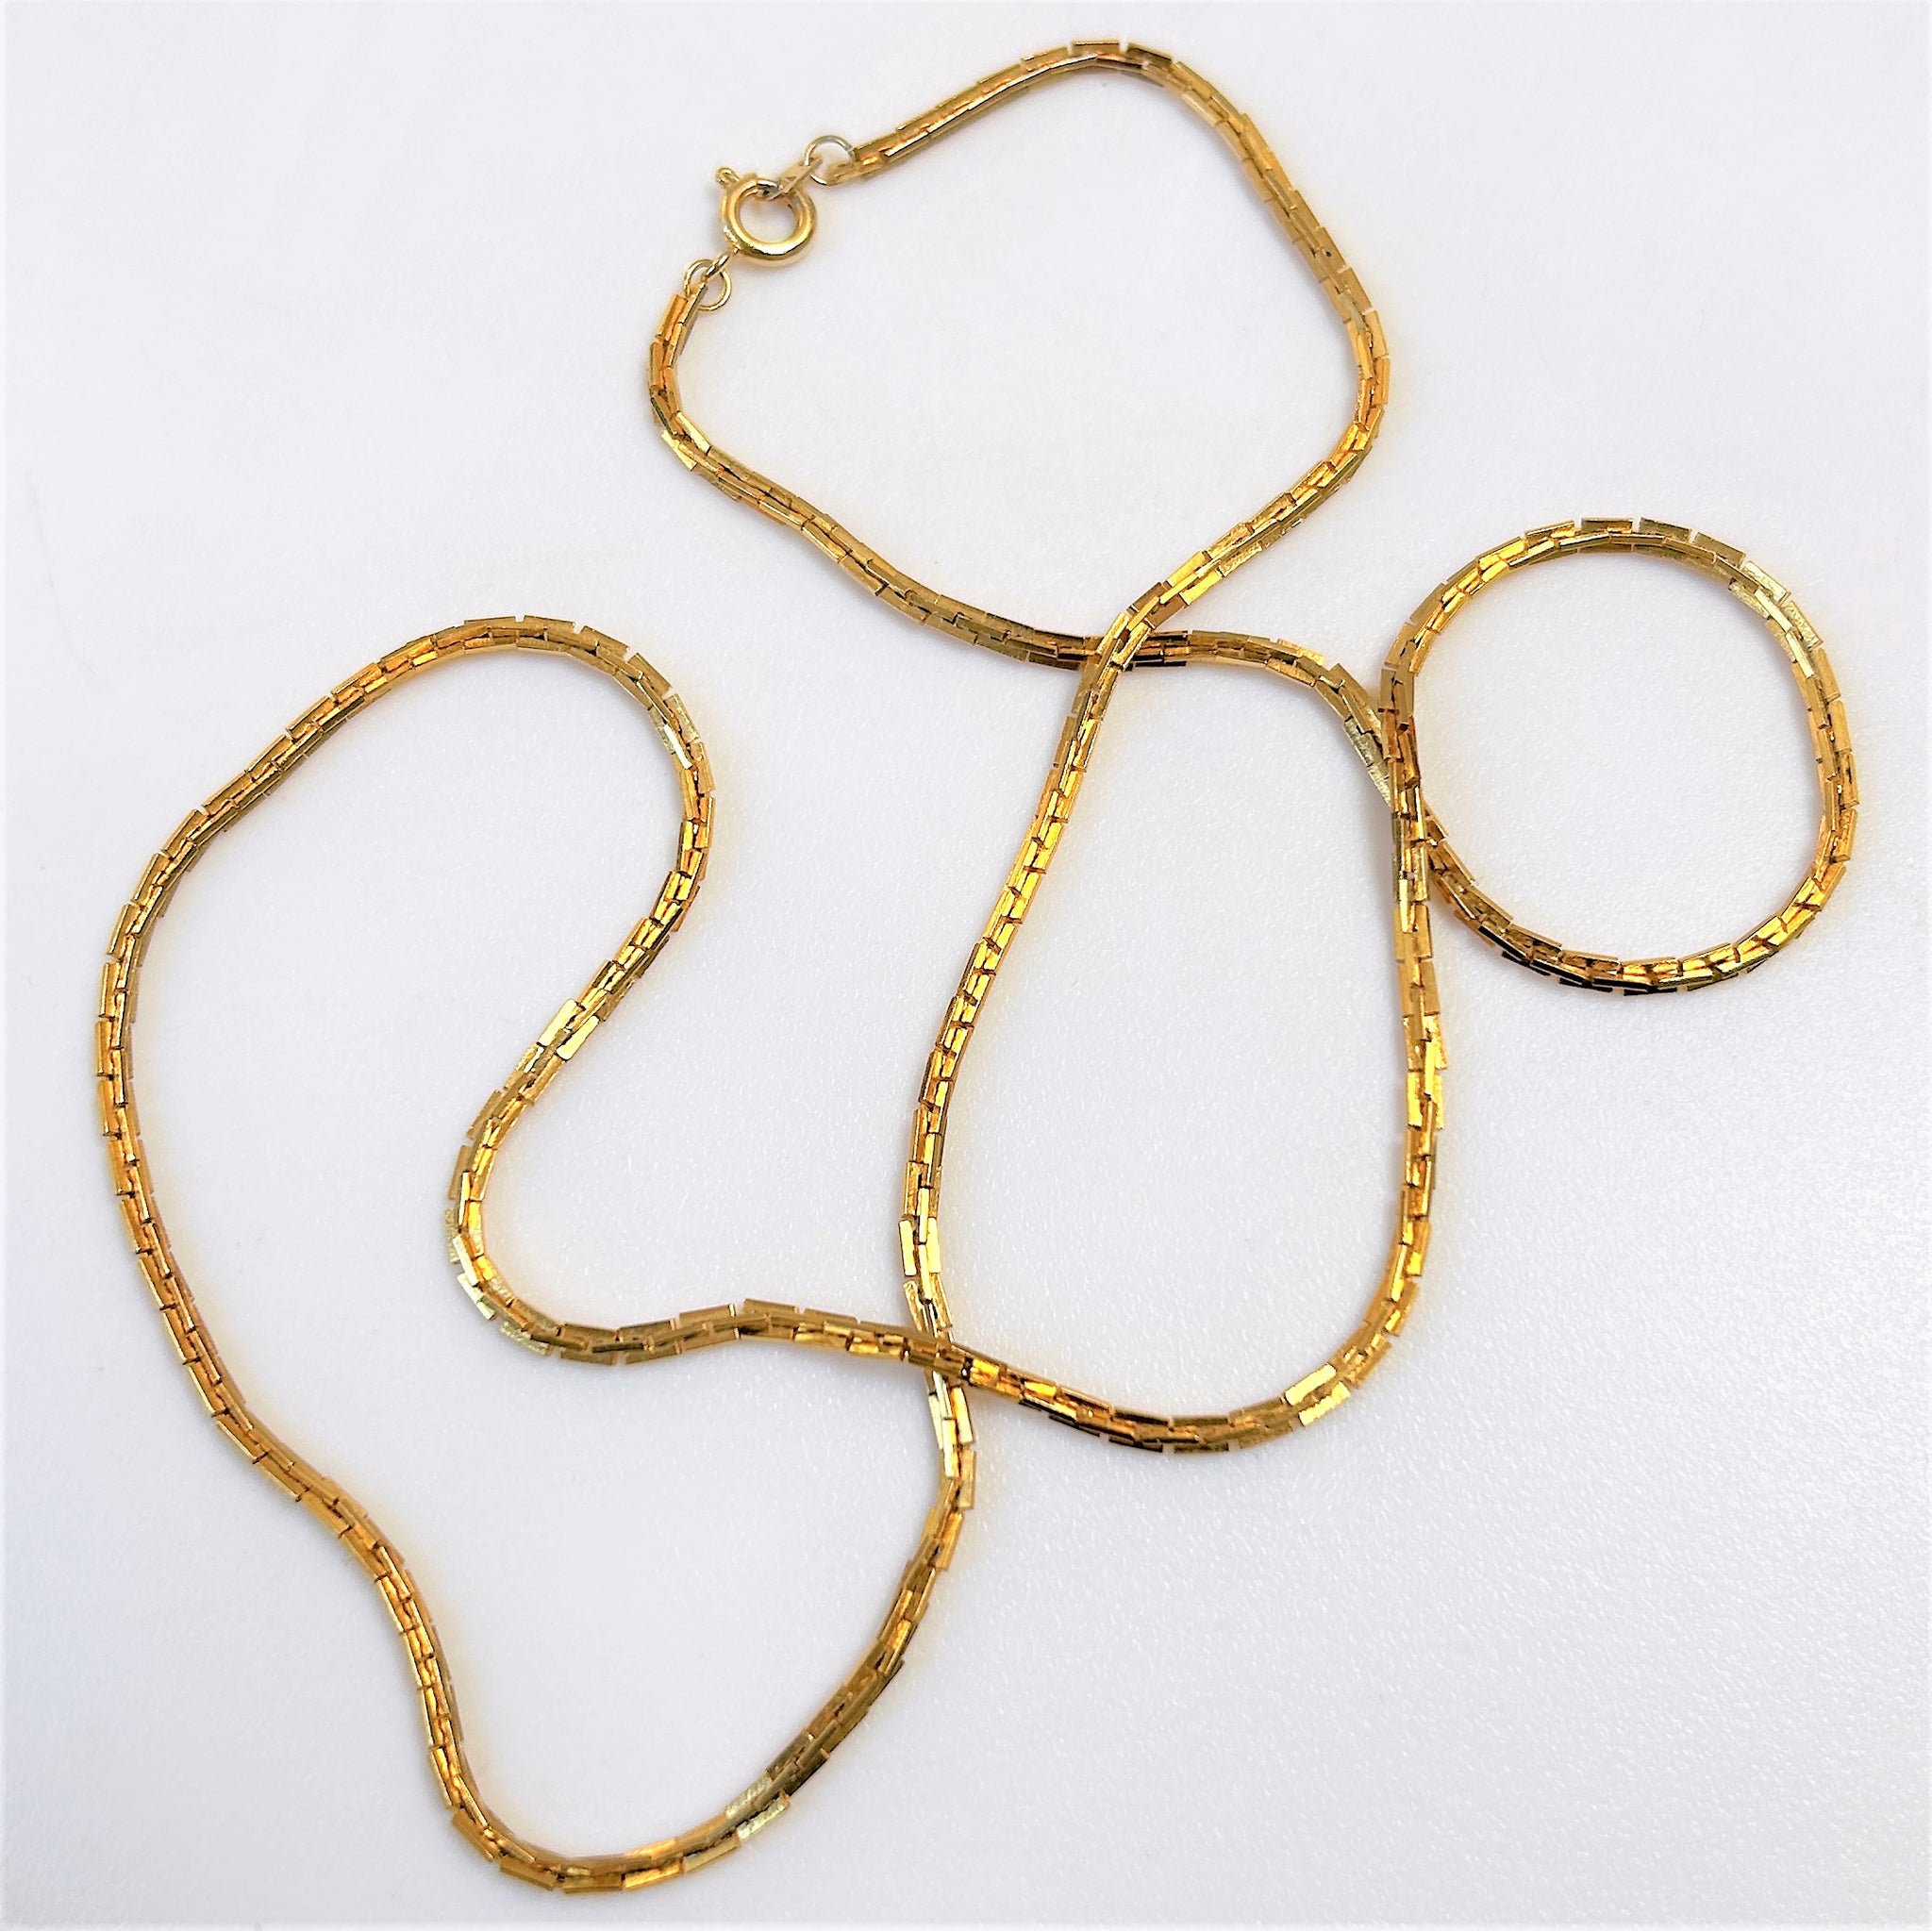 Yellow Metal Chain Necklace